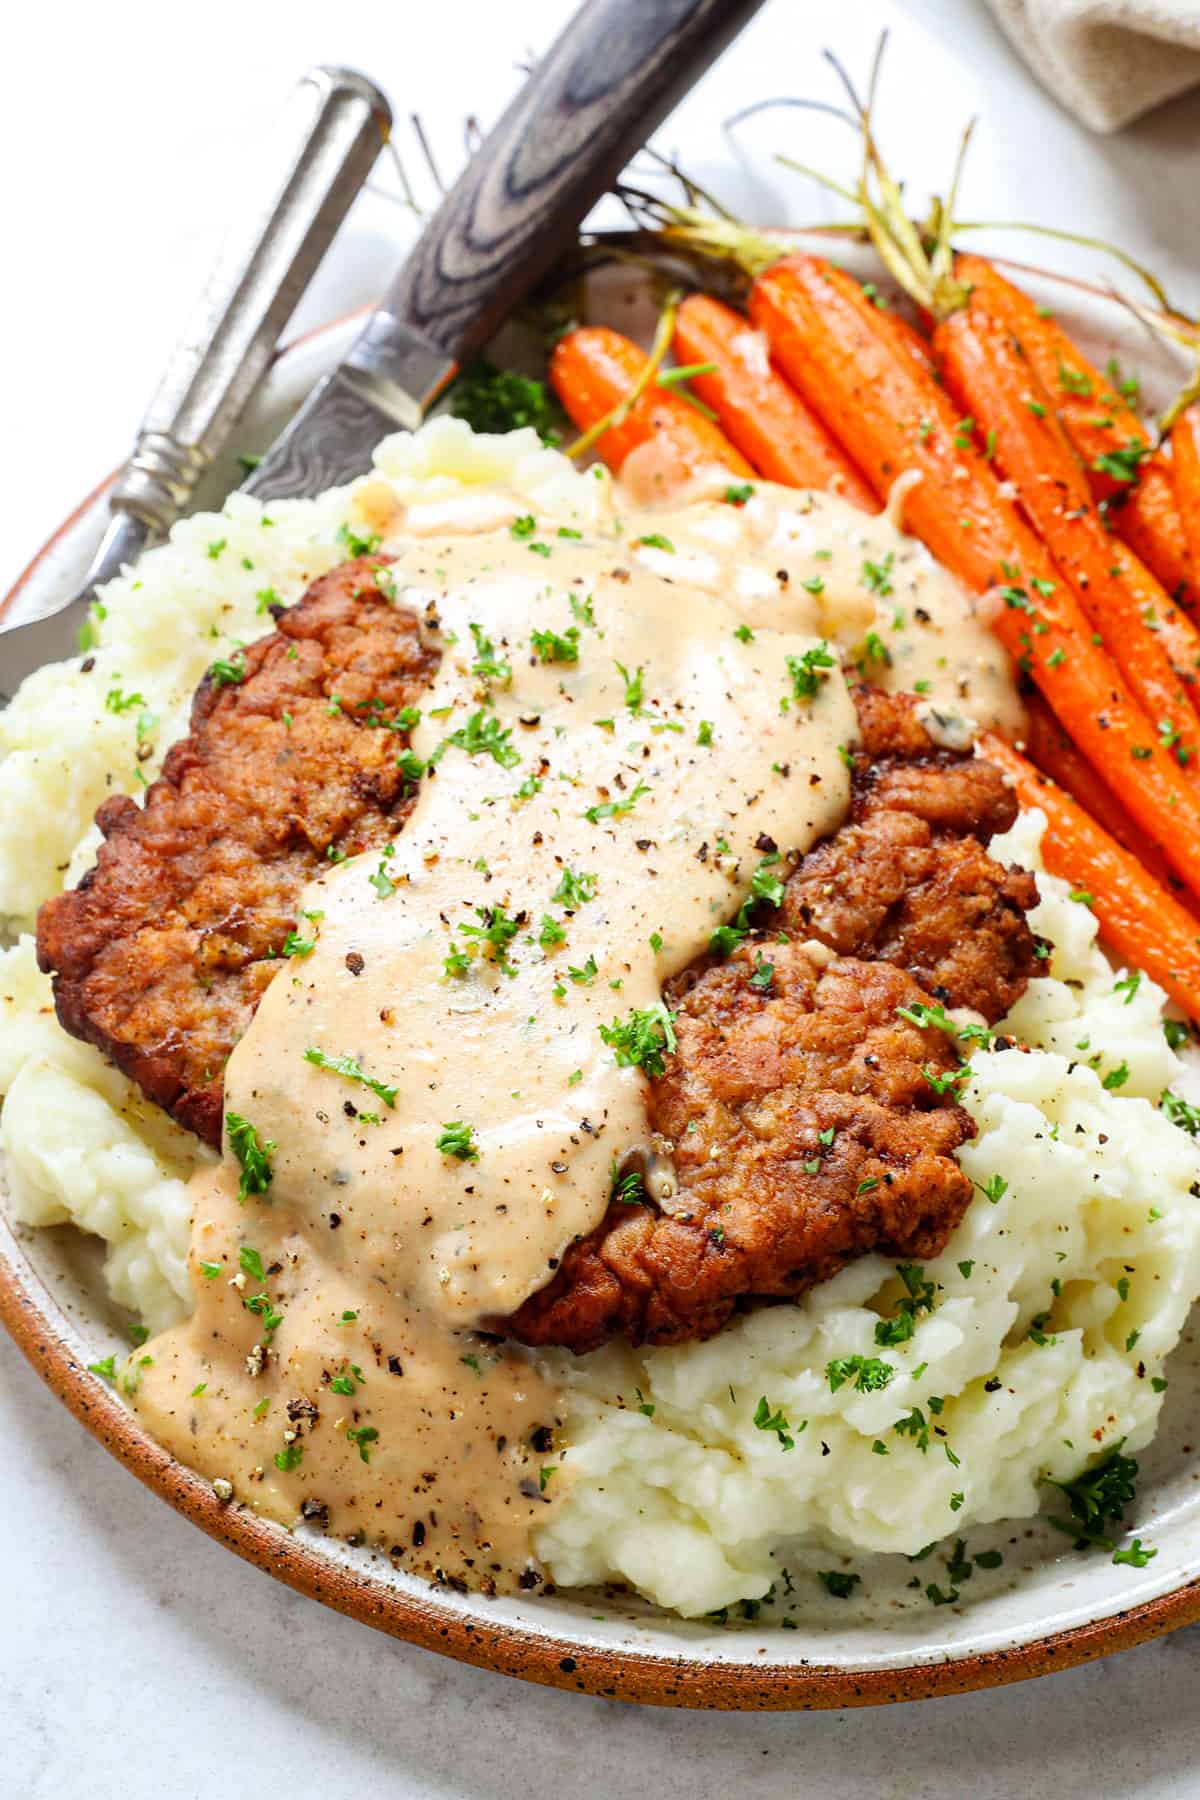 serving chicken fried steak with gravy and mashed potatoes